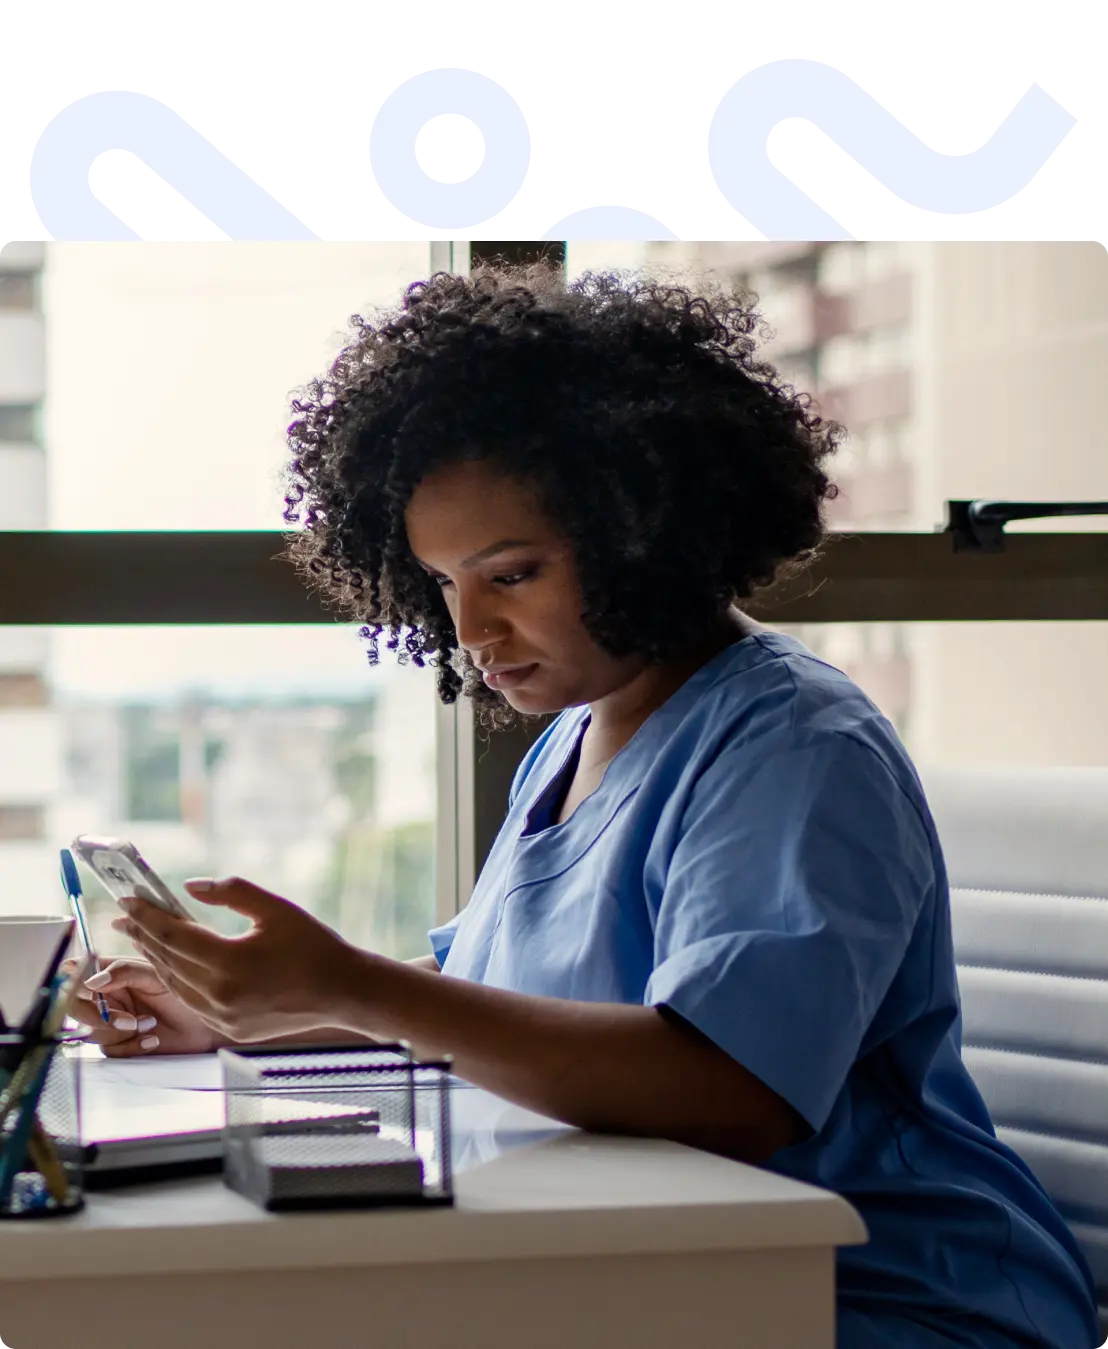 Doctor at her desk looking at her phone, with a pen in hand ready to write down results.